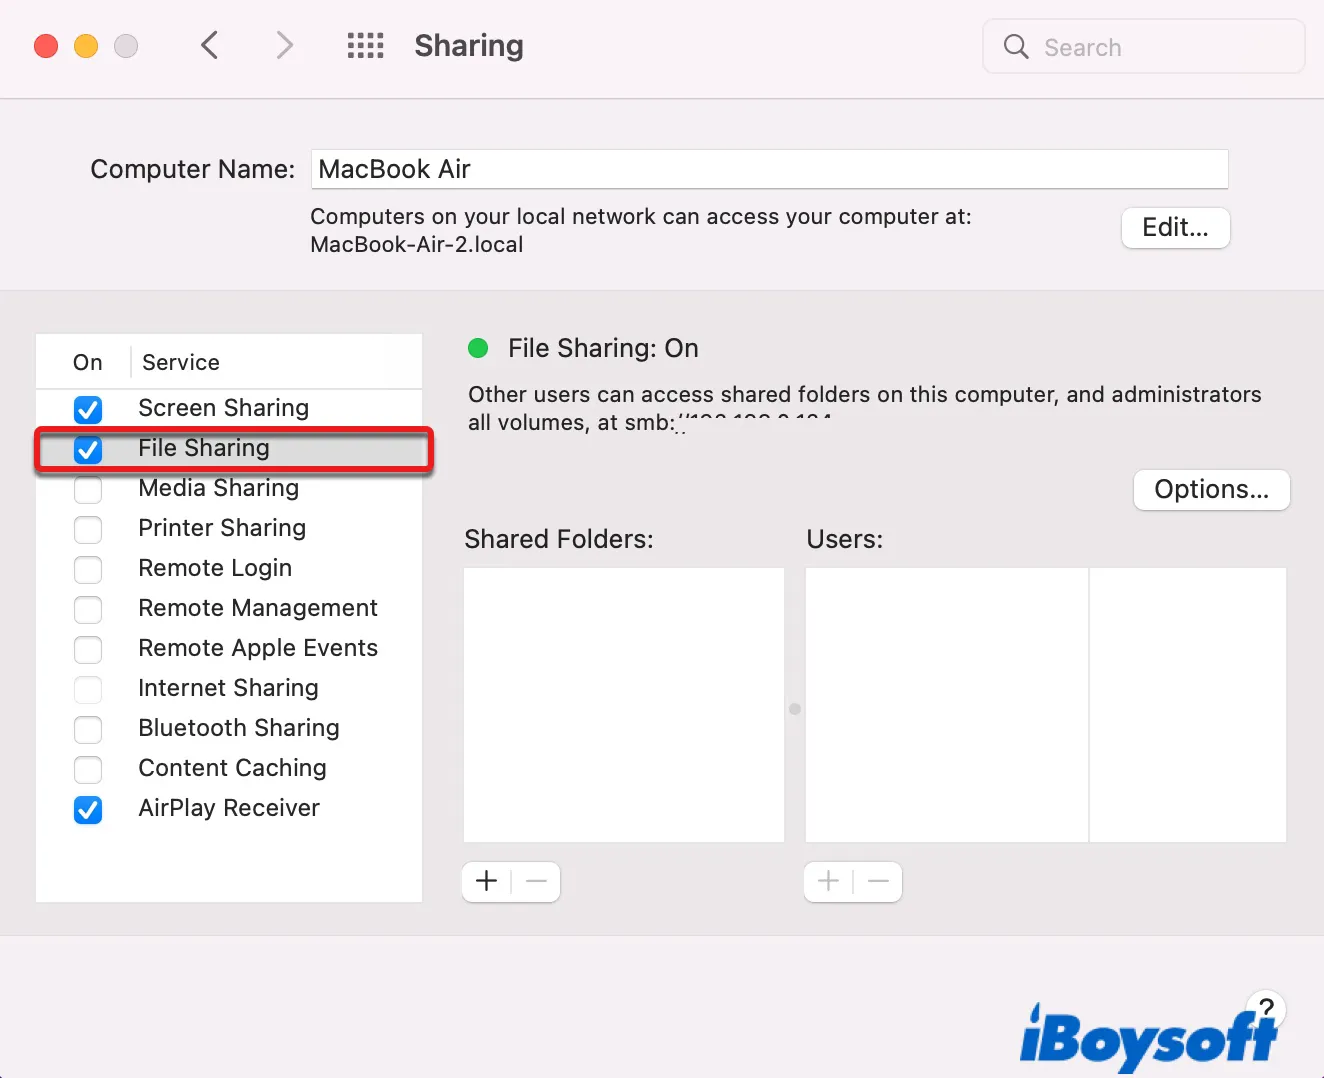 Enable File Sharing on Mac